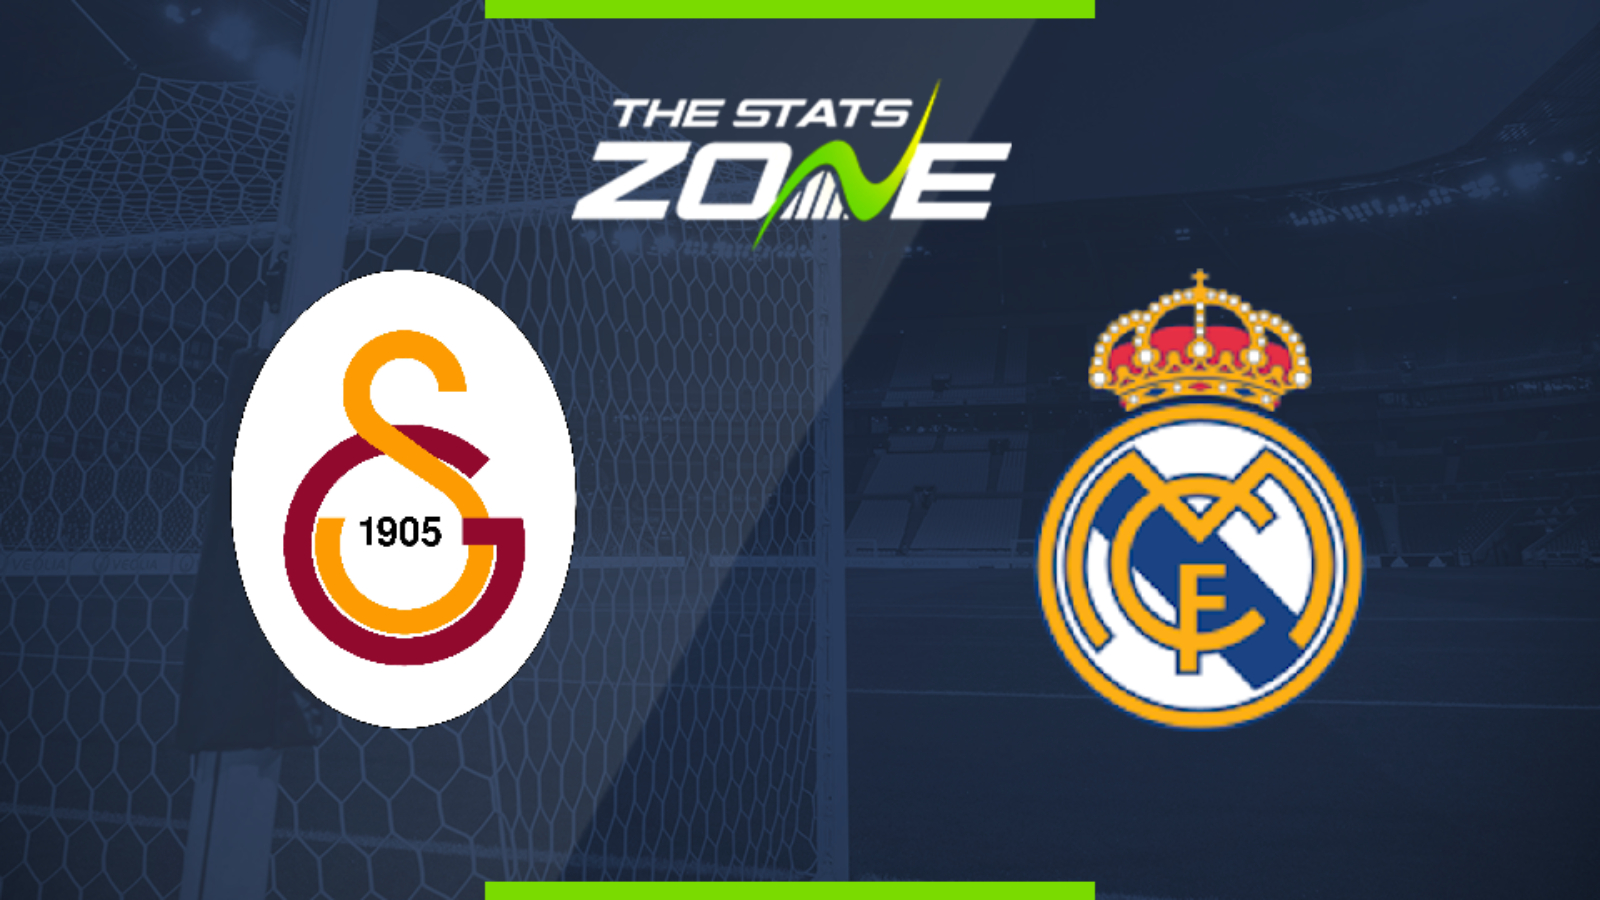 2019-20 UEFA Champions League - Galatasaray vs Real Madrid Preview & Prediction - The Stats Zone